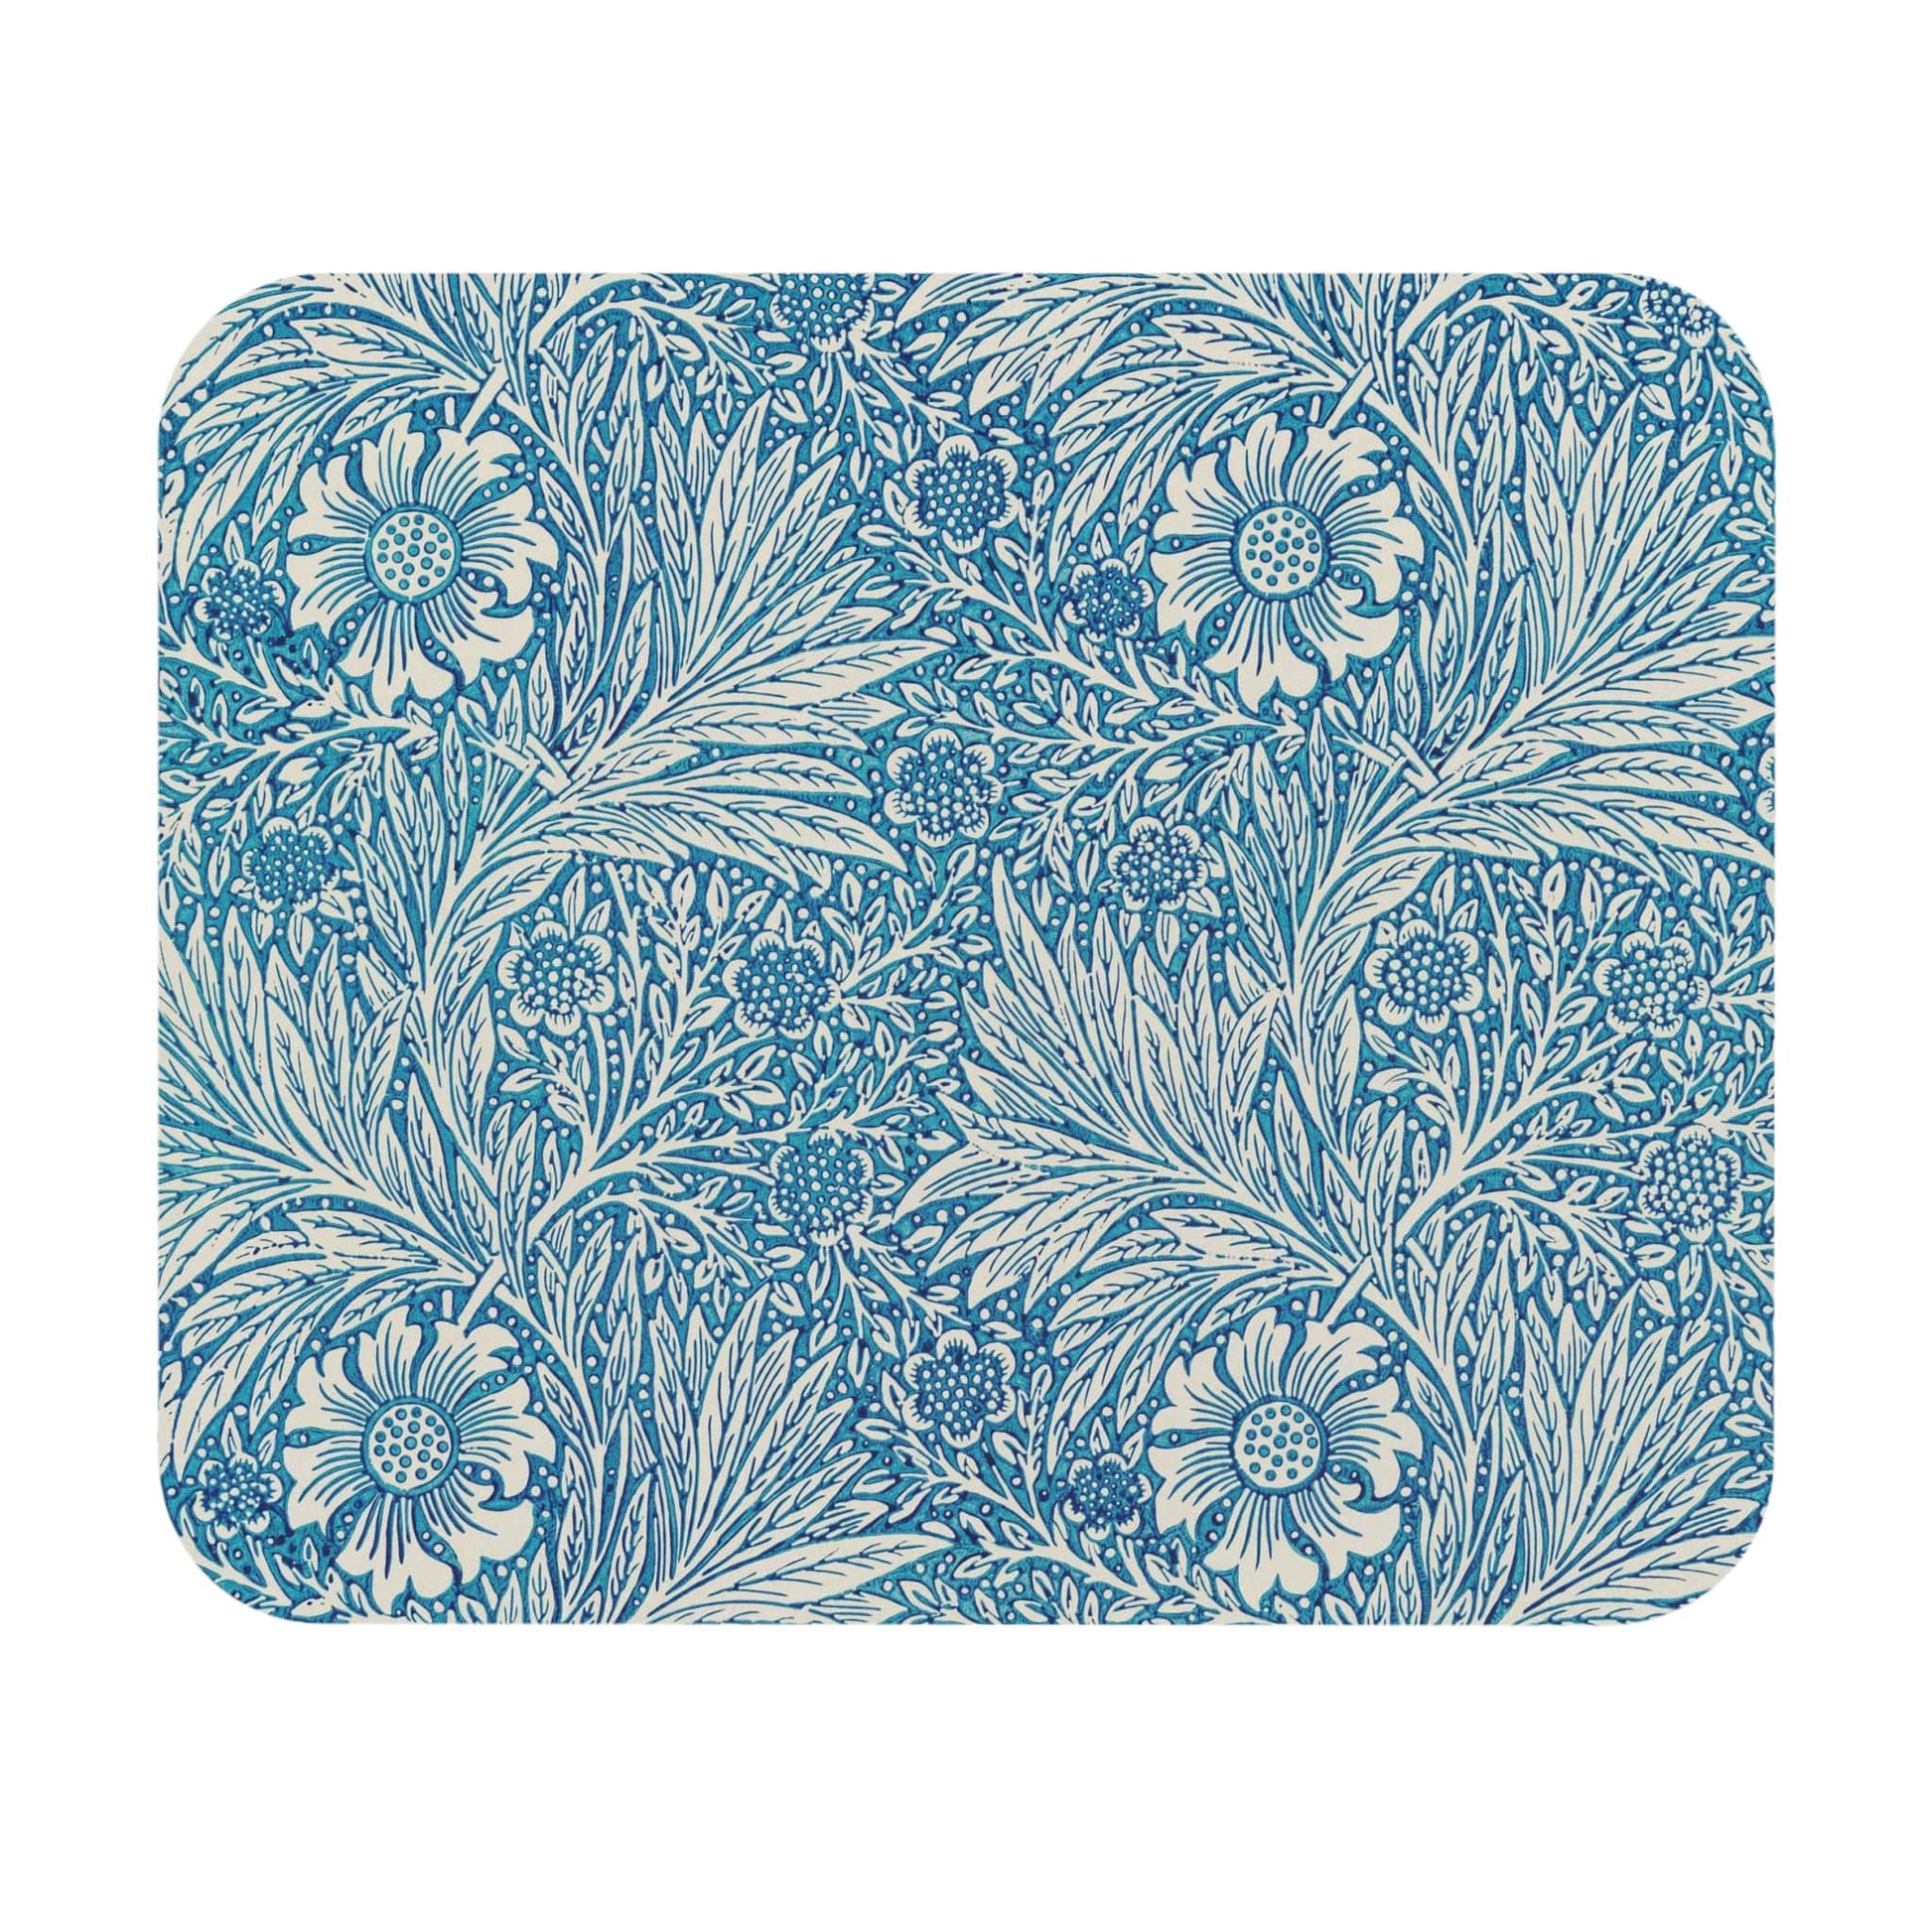 Floral Pattern Mouse Pad with blue marigolds art, desk and office decor featuring elegant marigold designs.